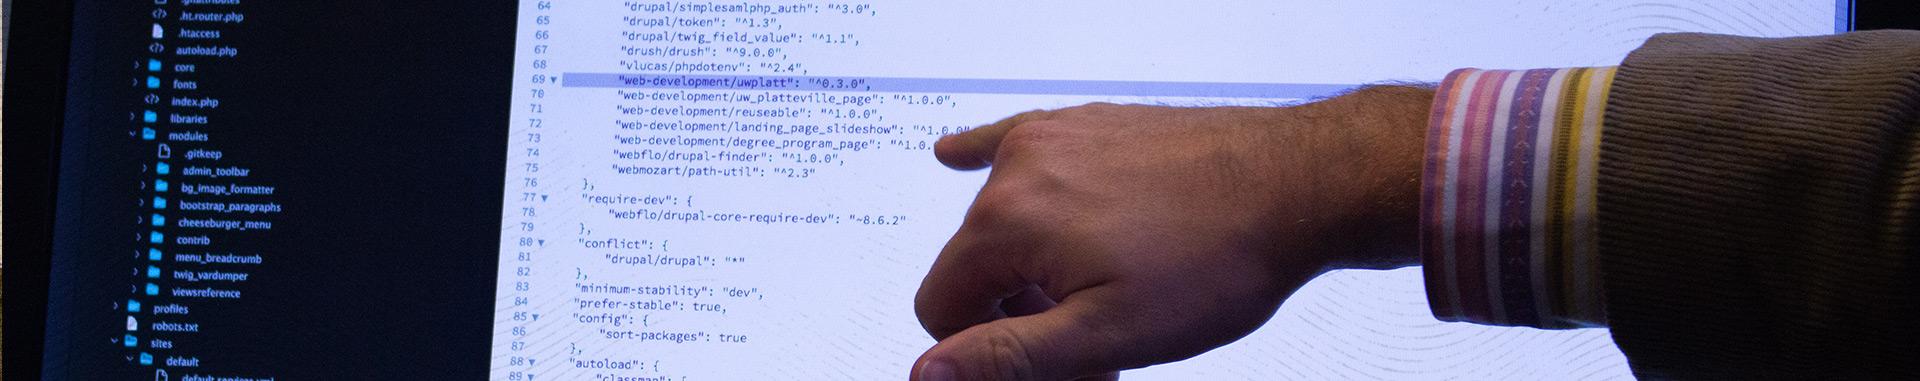 Hand and forearm of a Male Vendi employee pointing out specific web development code on a computer screen